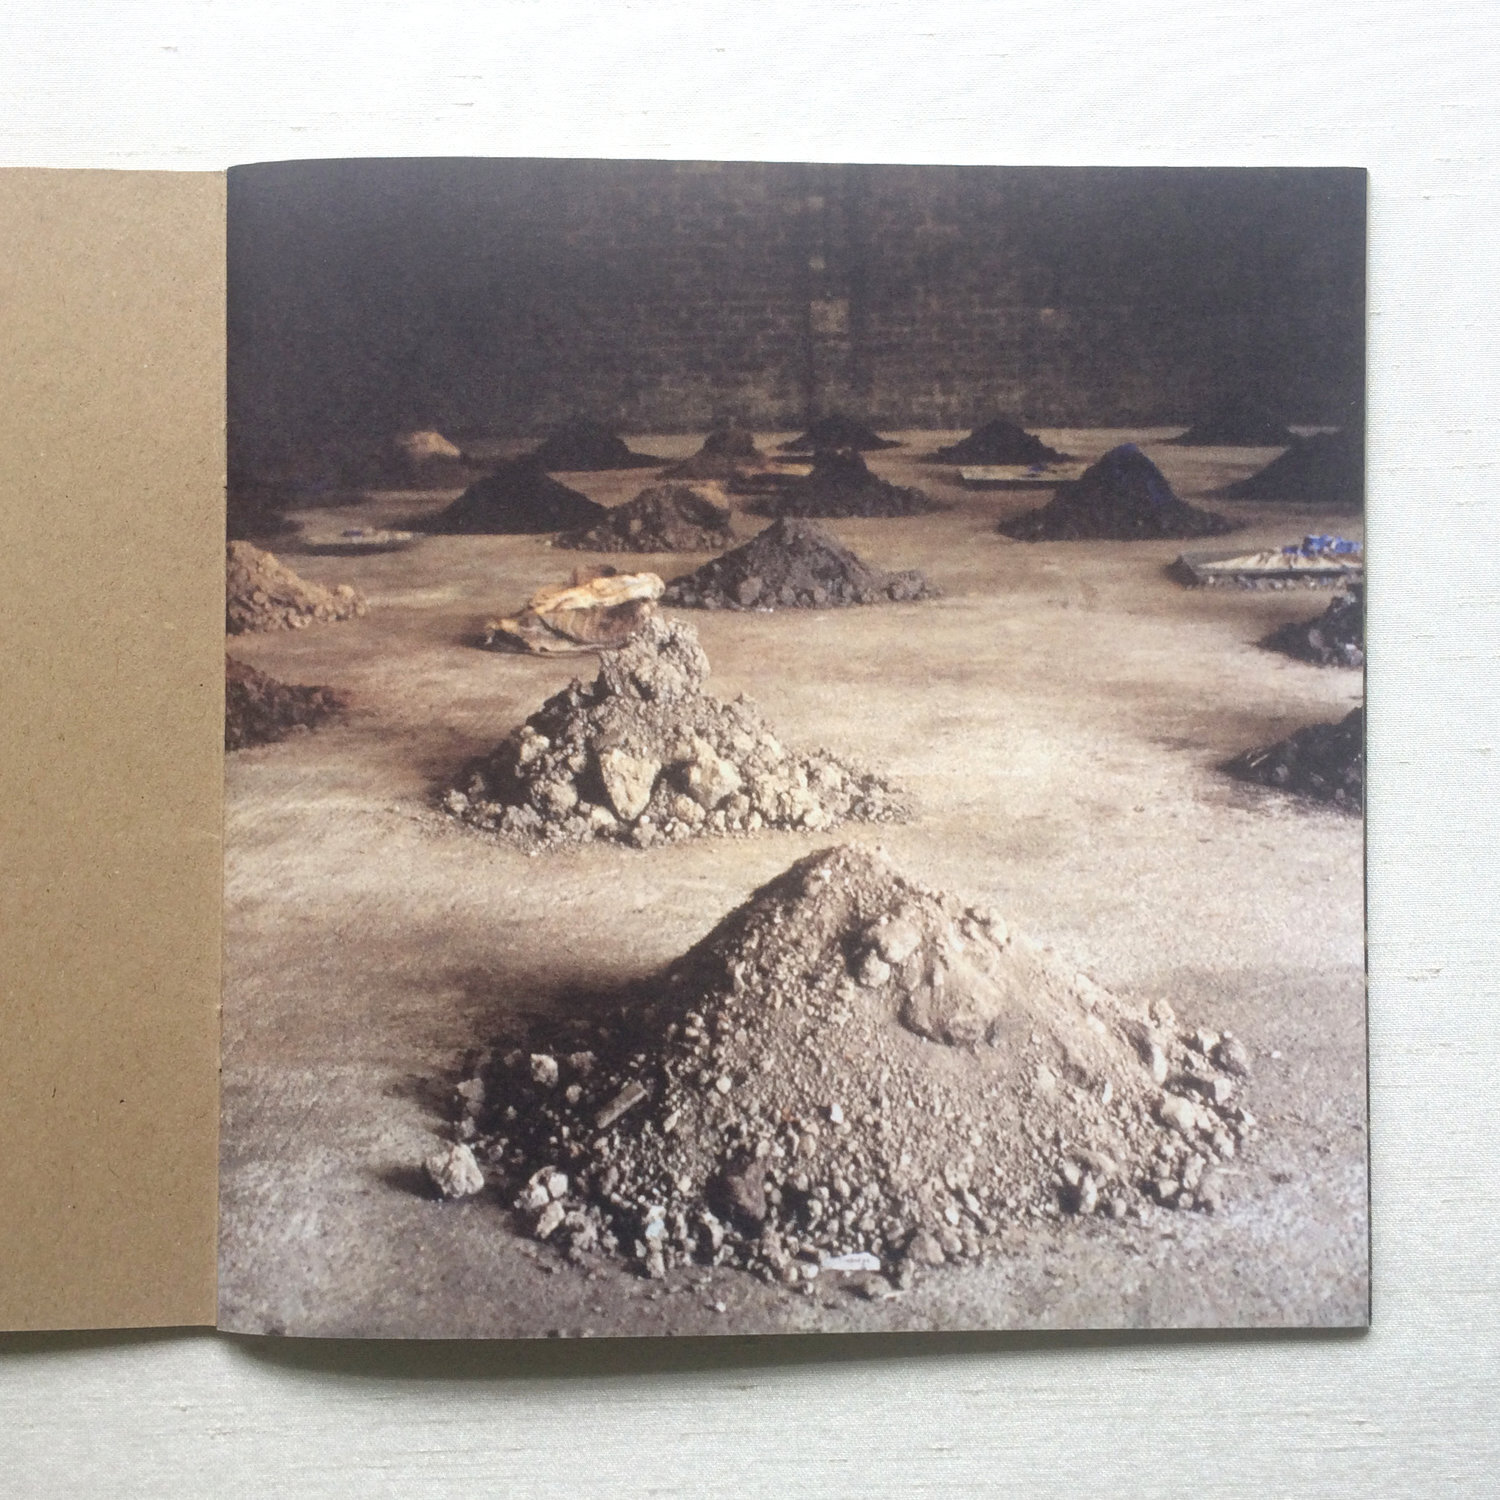 First page in artist Patricia McKenna's catalogue showing heaps of soil on concrete floor